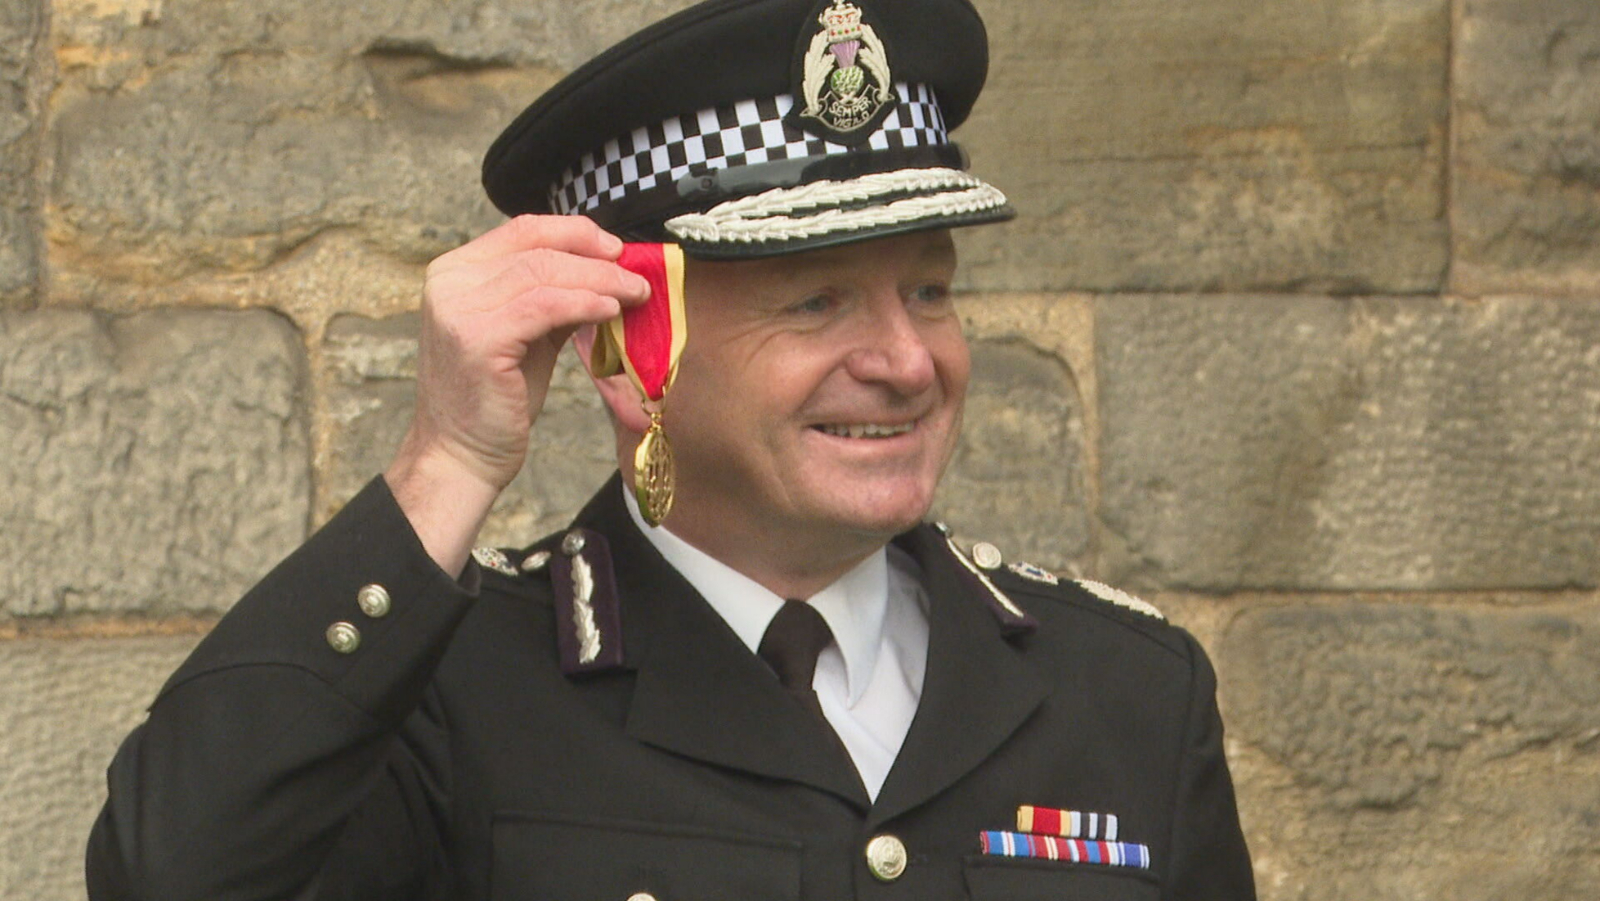 Sir Iain Livingstone after receiving his Knighthood at the Palace of Holyroodhouse.